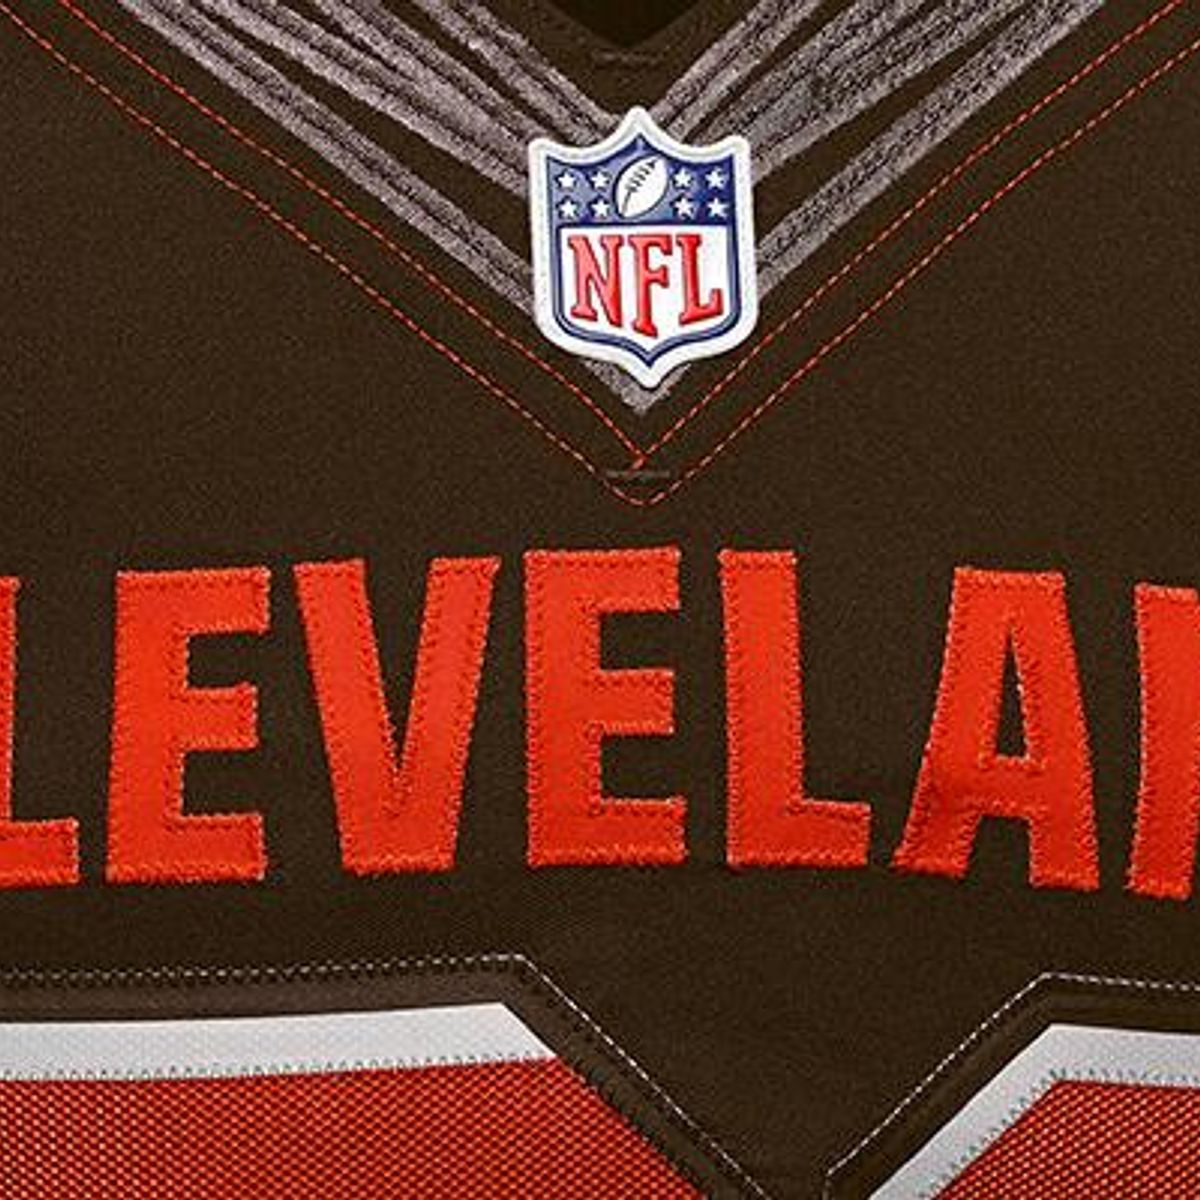 Letter Exchange Between Law Firm and Cleveland Browns